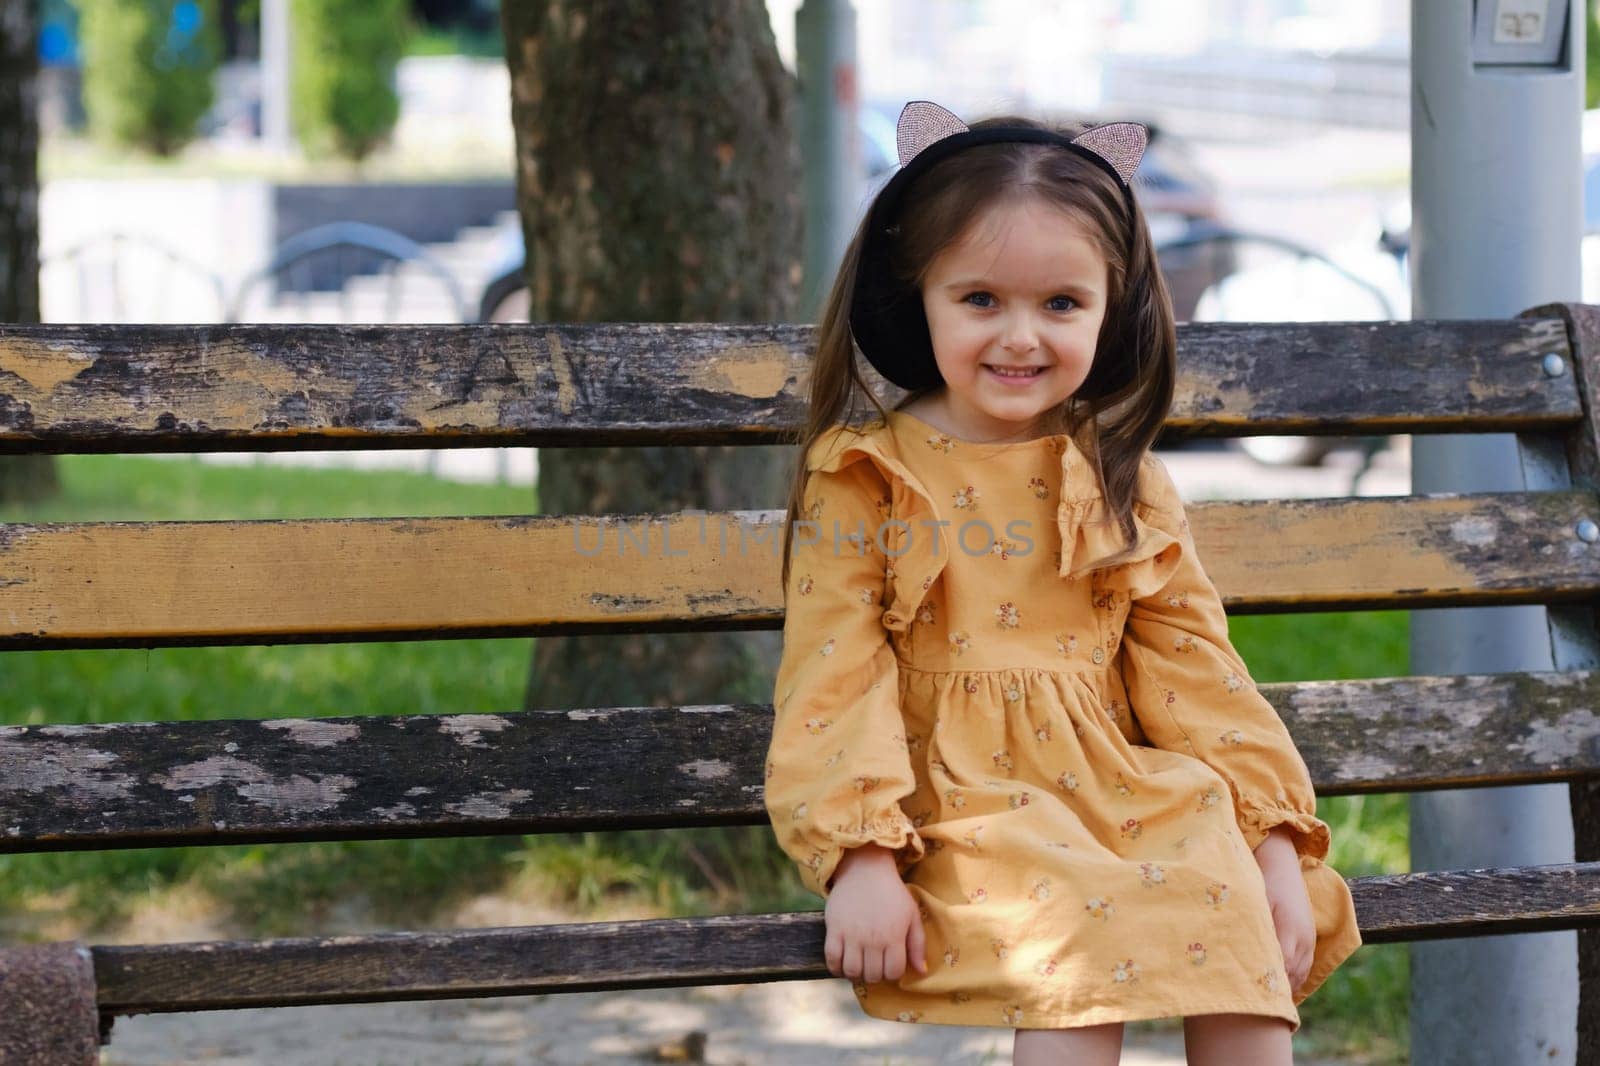 Portrait of a four-year-old girl sitting on a park bench.